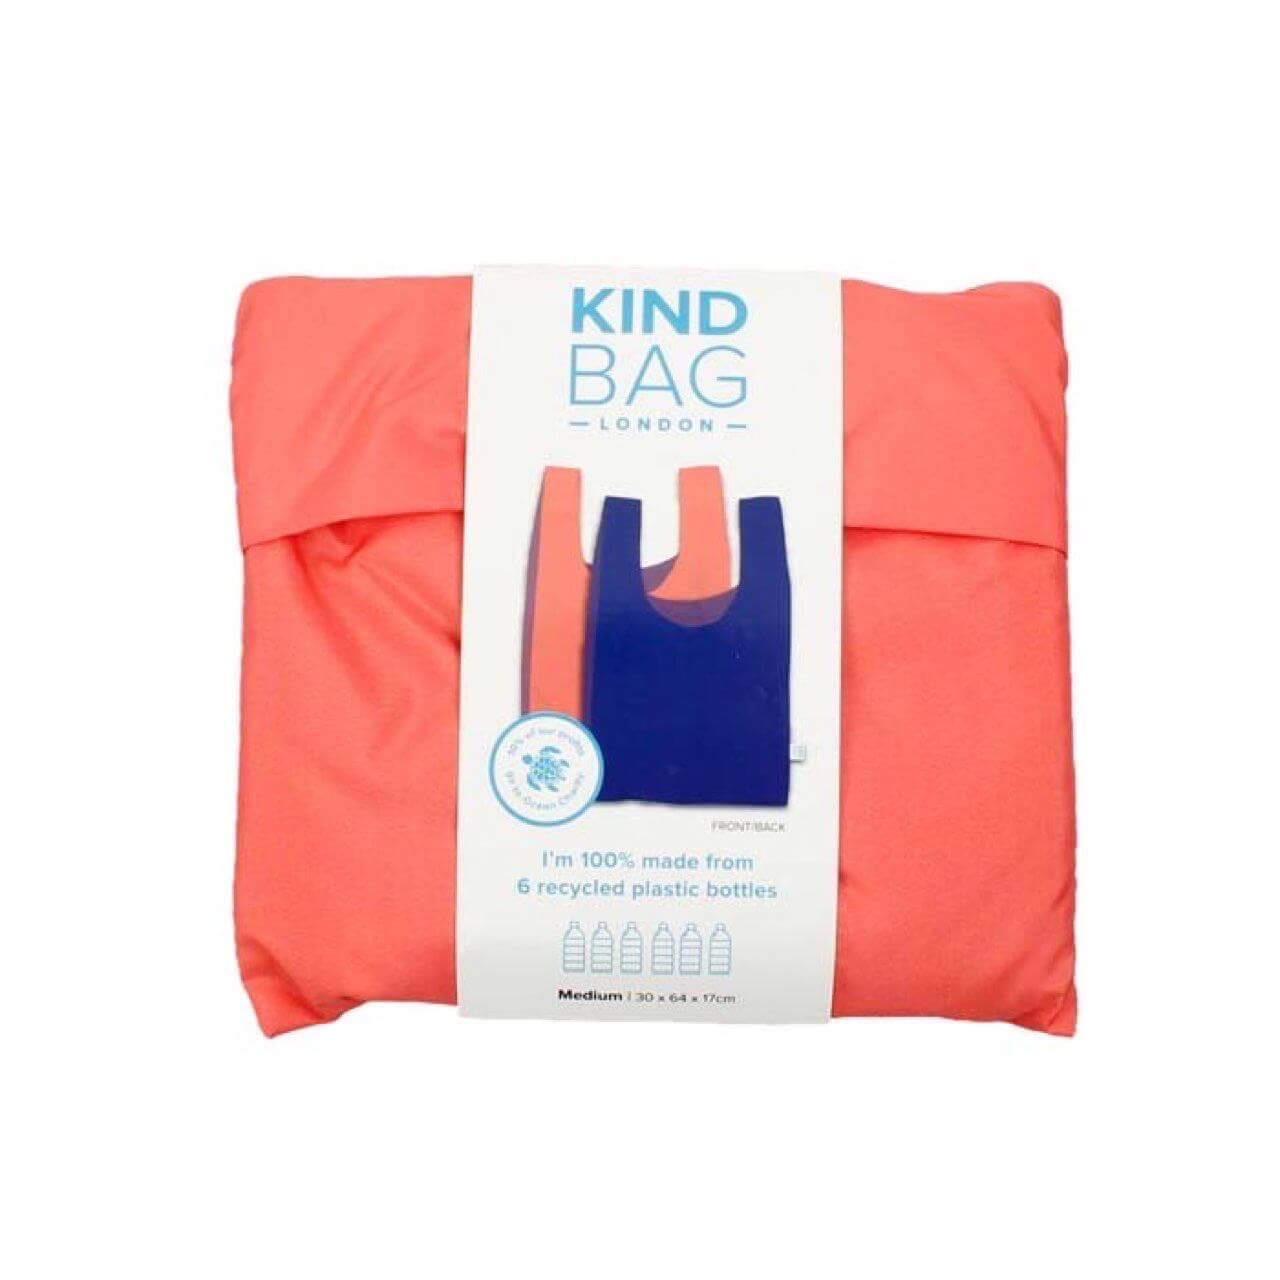 kind bag duo ginger fairy